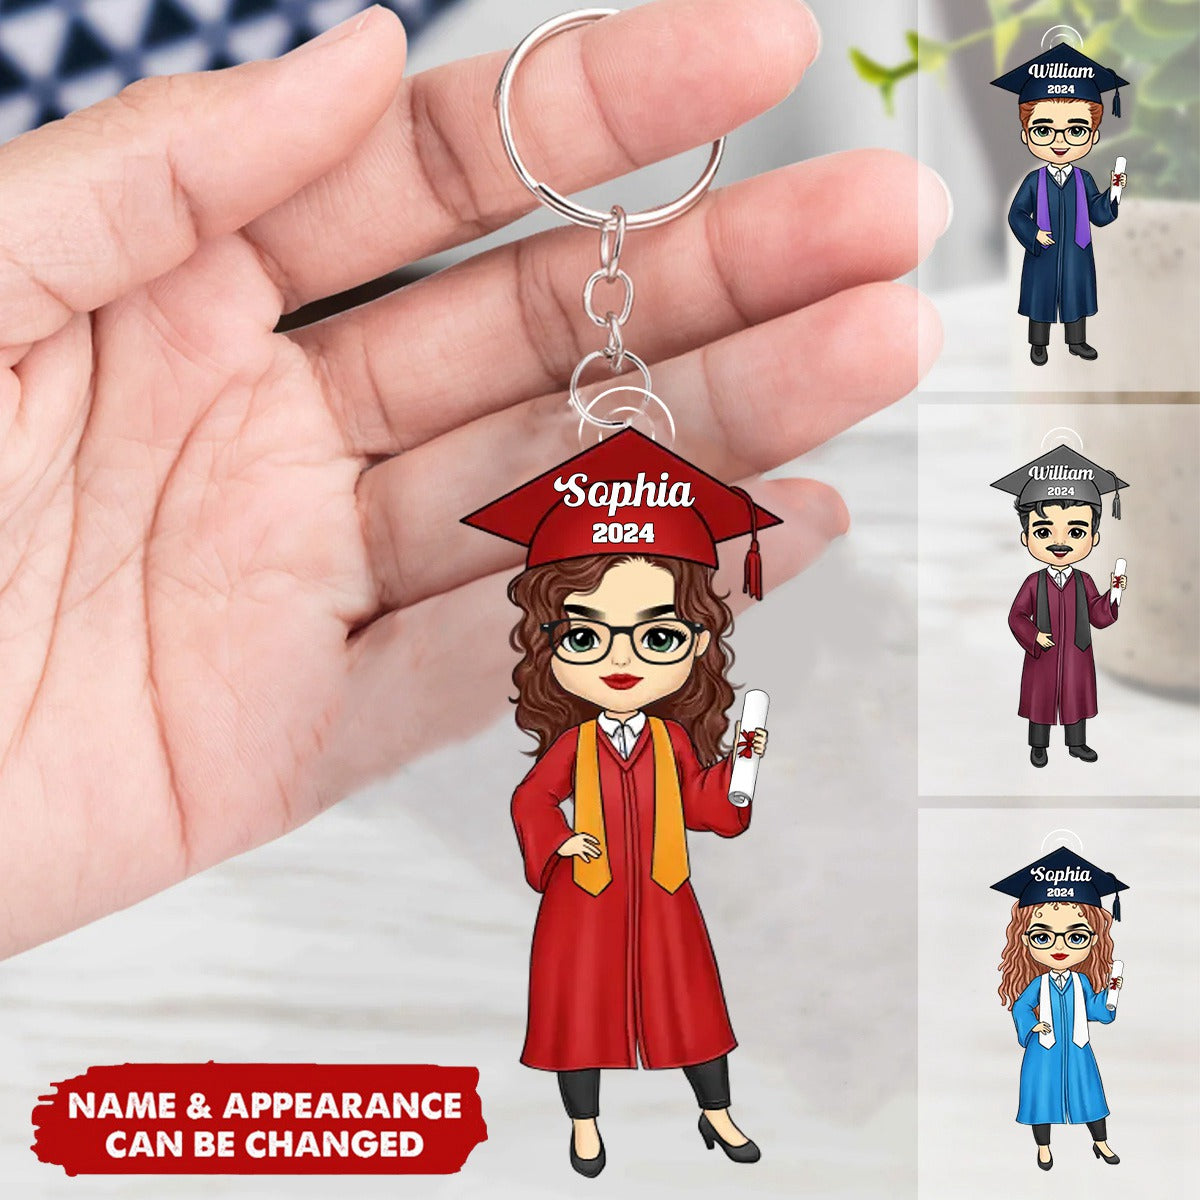 You Belived You Could So You Did - Family Personalized Custom Shaped Acrylic Keychain - Graduation Gift For Family Members, Siblings, Brothers, Sisters